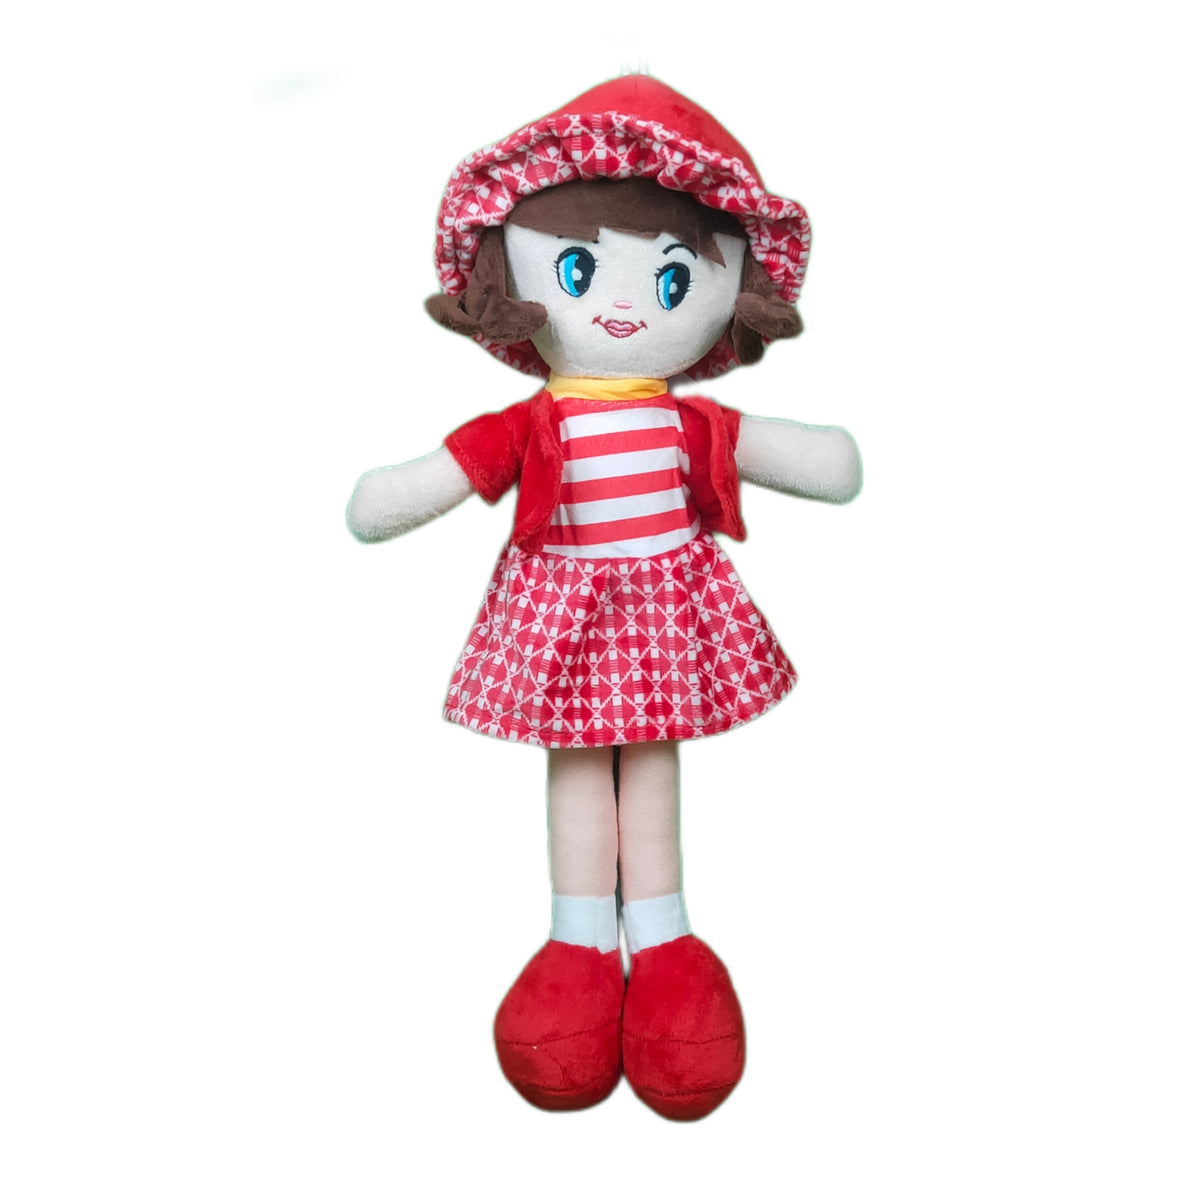 Play Hour Winky Rag Doll Plush Soft Toy Wearing Pink Dress for Ages 3 Years and Up, 40cm